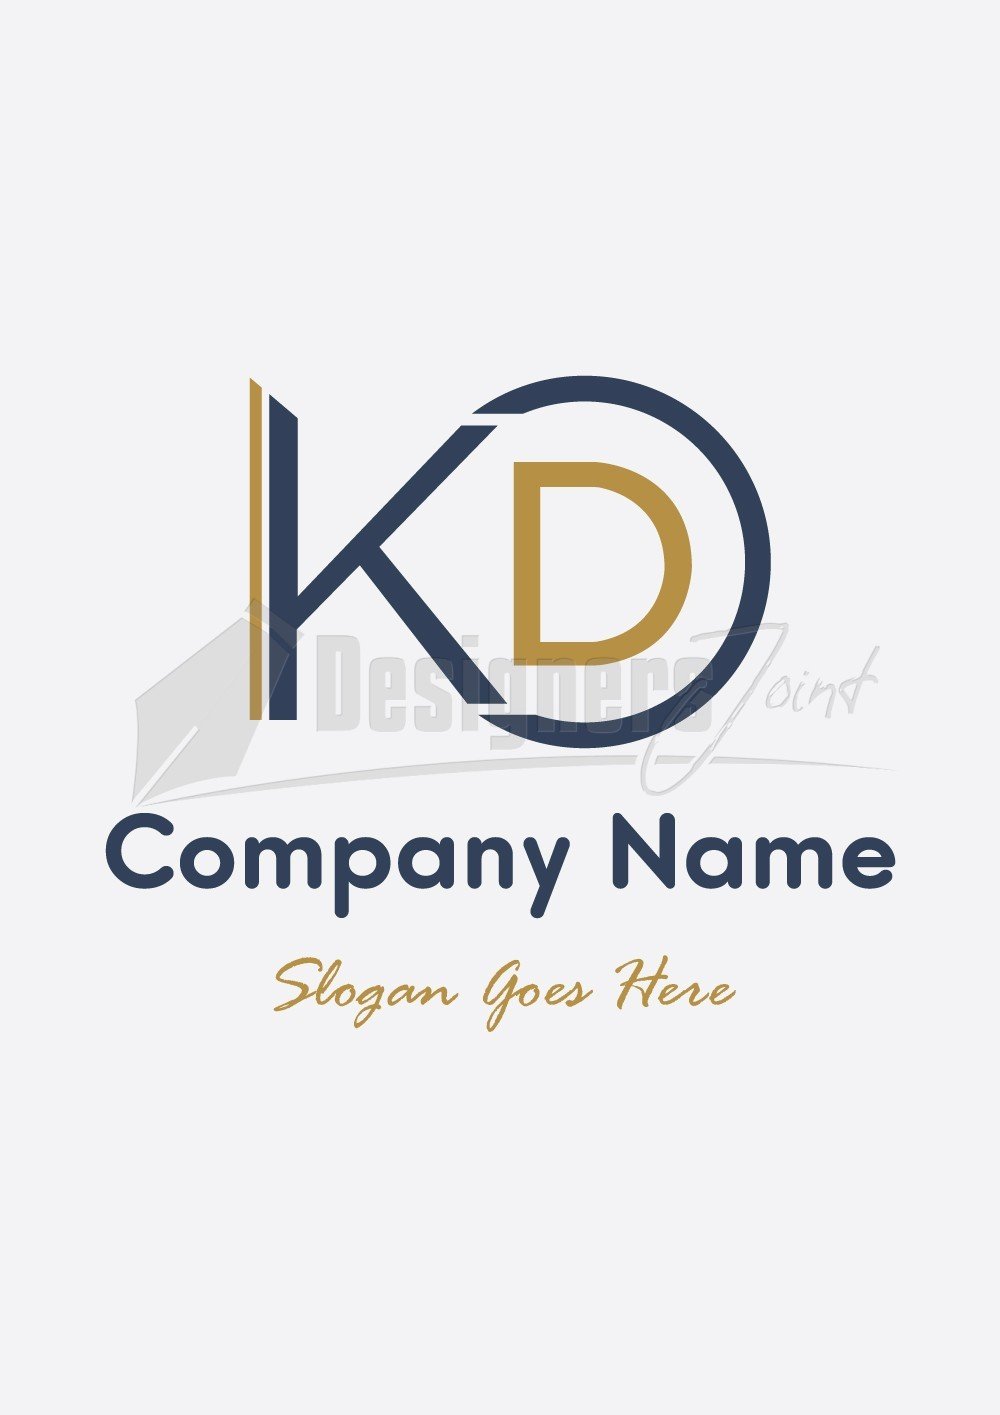 Initial Letter Logo Company Name Blue Grey Color Swoosh Design Stock Vector  by ©wikaGrahic 431147658